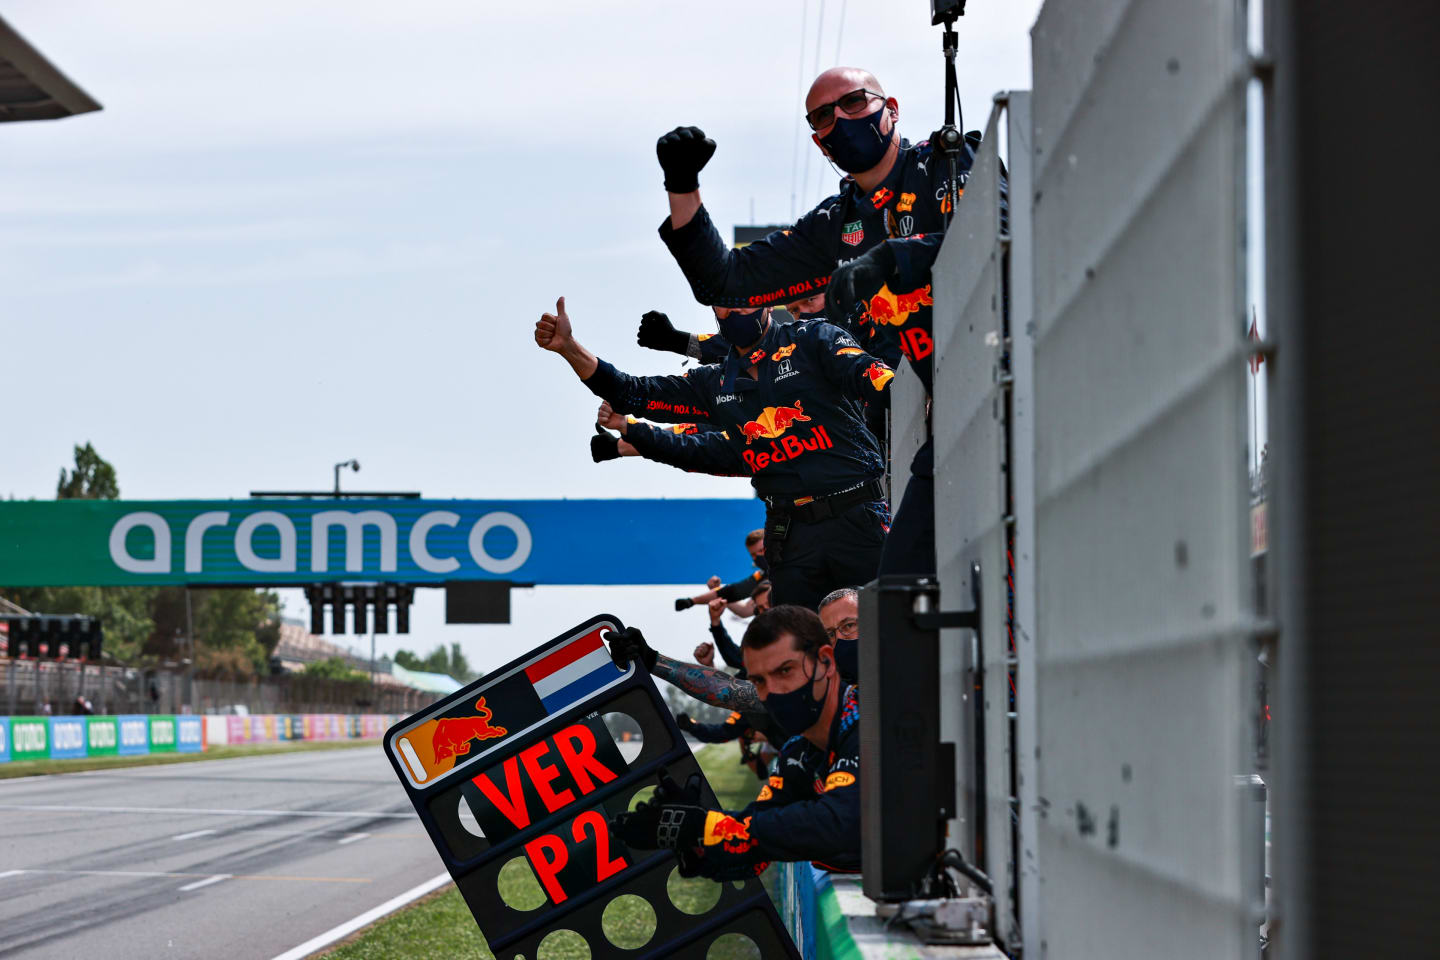 BARCELONA, SPAIN - MAY 09: The Red Bull Racing team celebrate the second place finish of Max